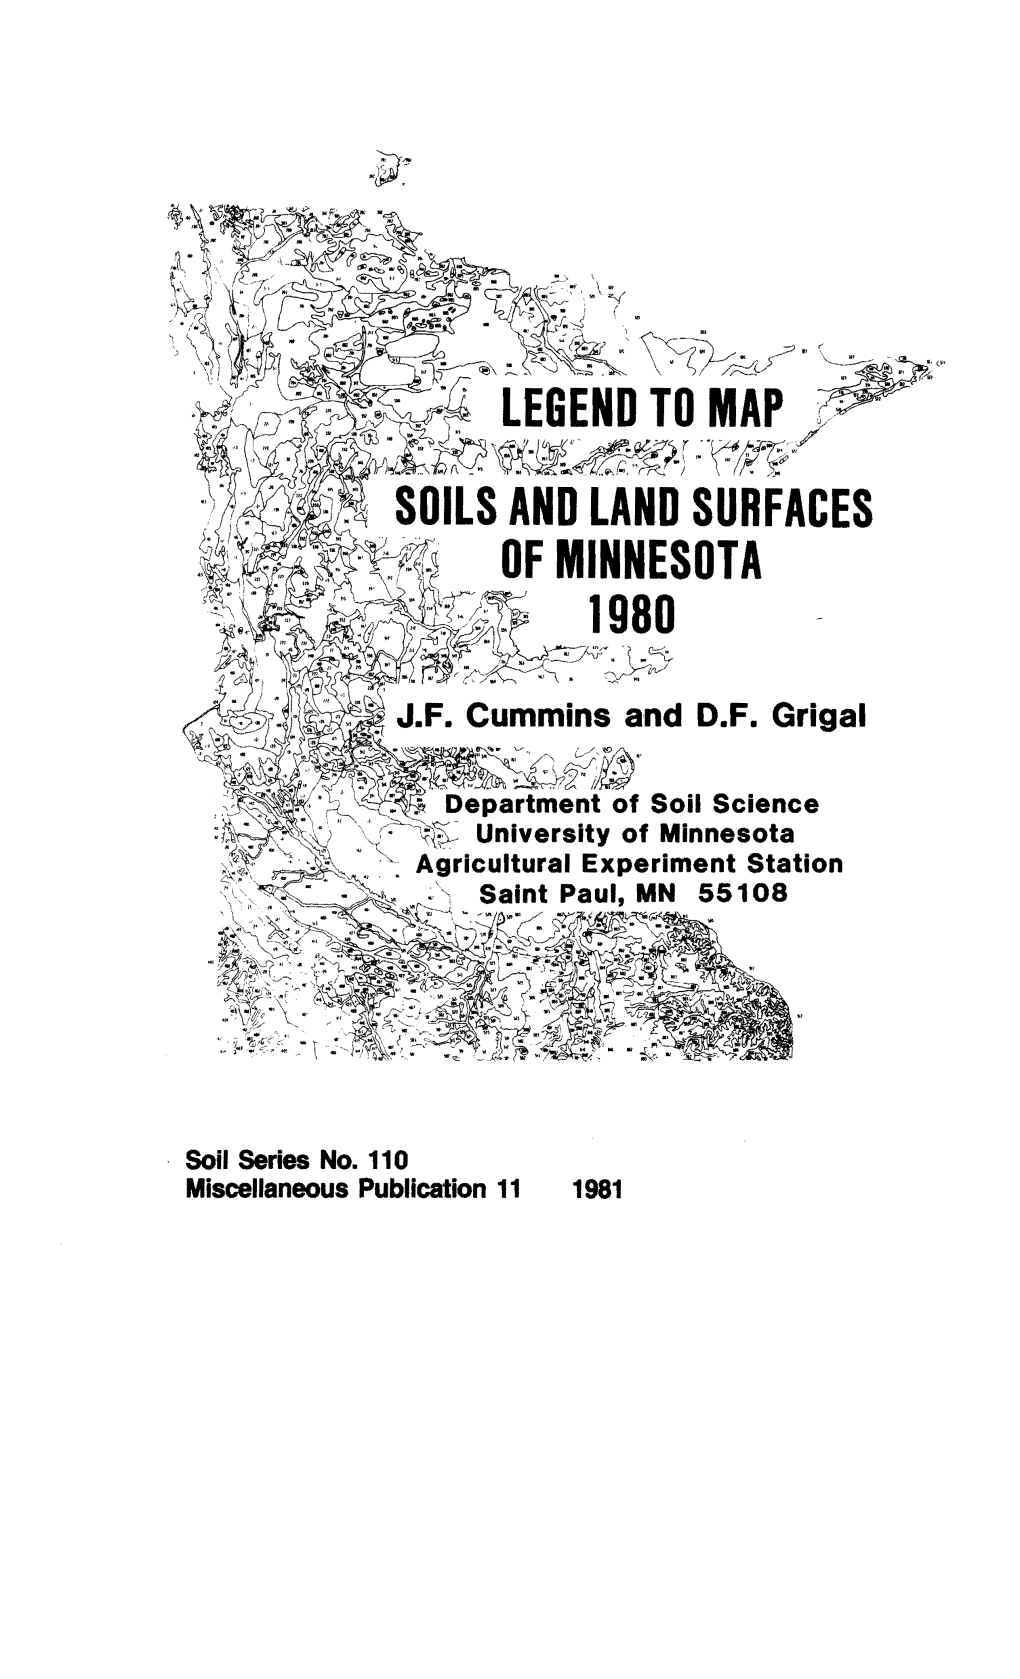 Soils and Land Surfaces of Minnesota 1980